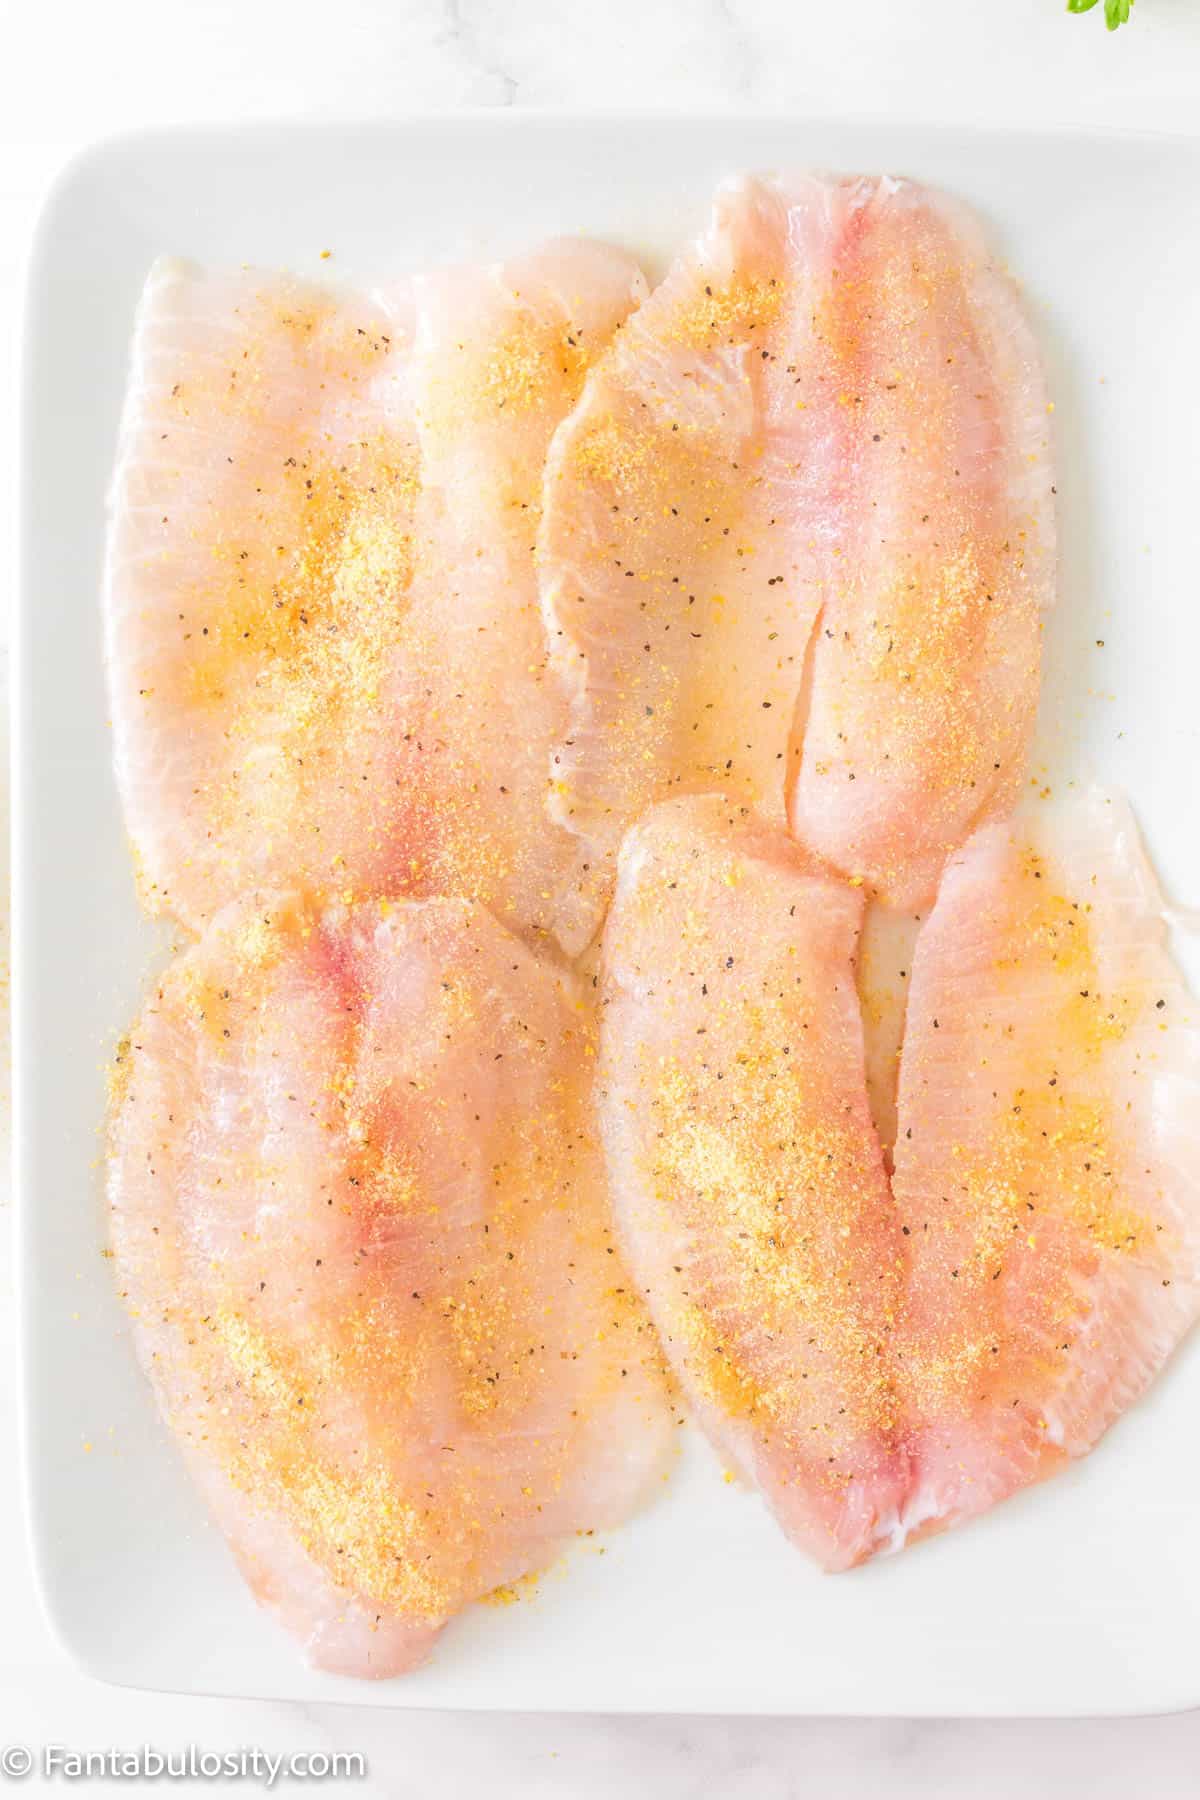 Raw fillets of tilapia with spices on them.